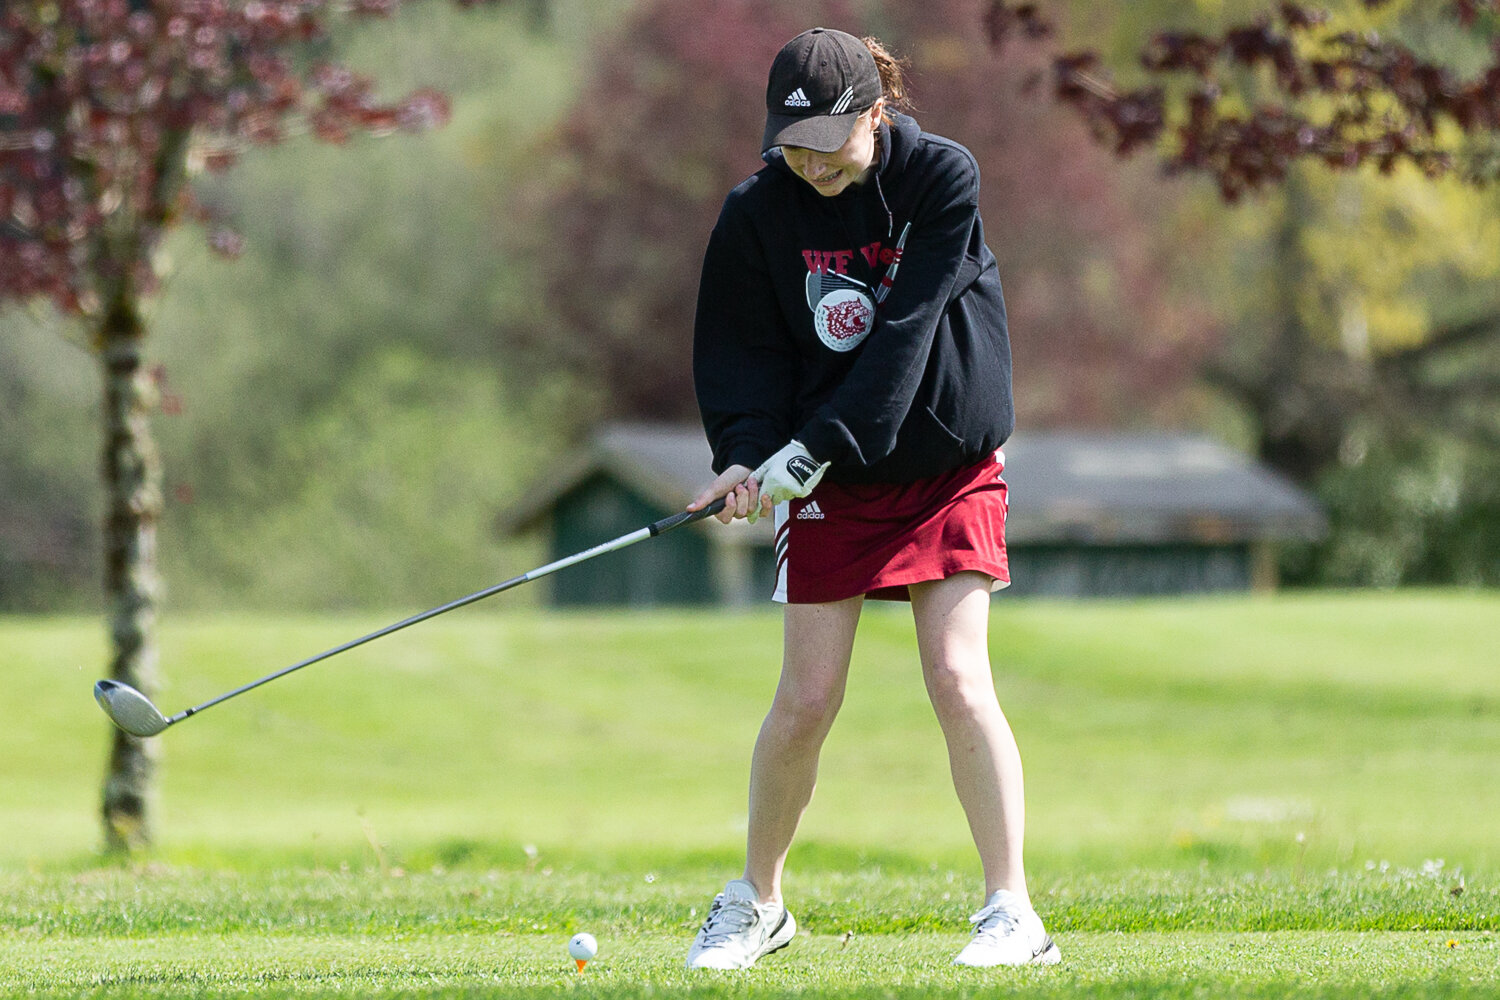 W.F. West's Abby Alexander prepares to tee off at Tumwater Valley Golf Course of the 2A EvCo Championships May 9.